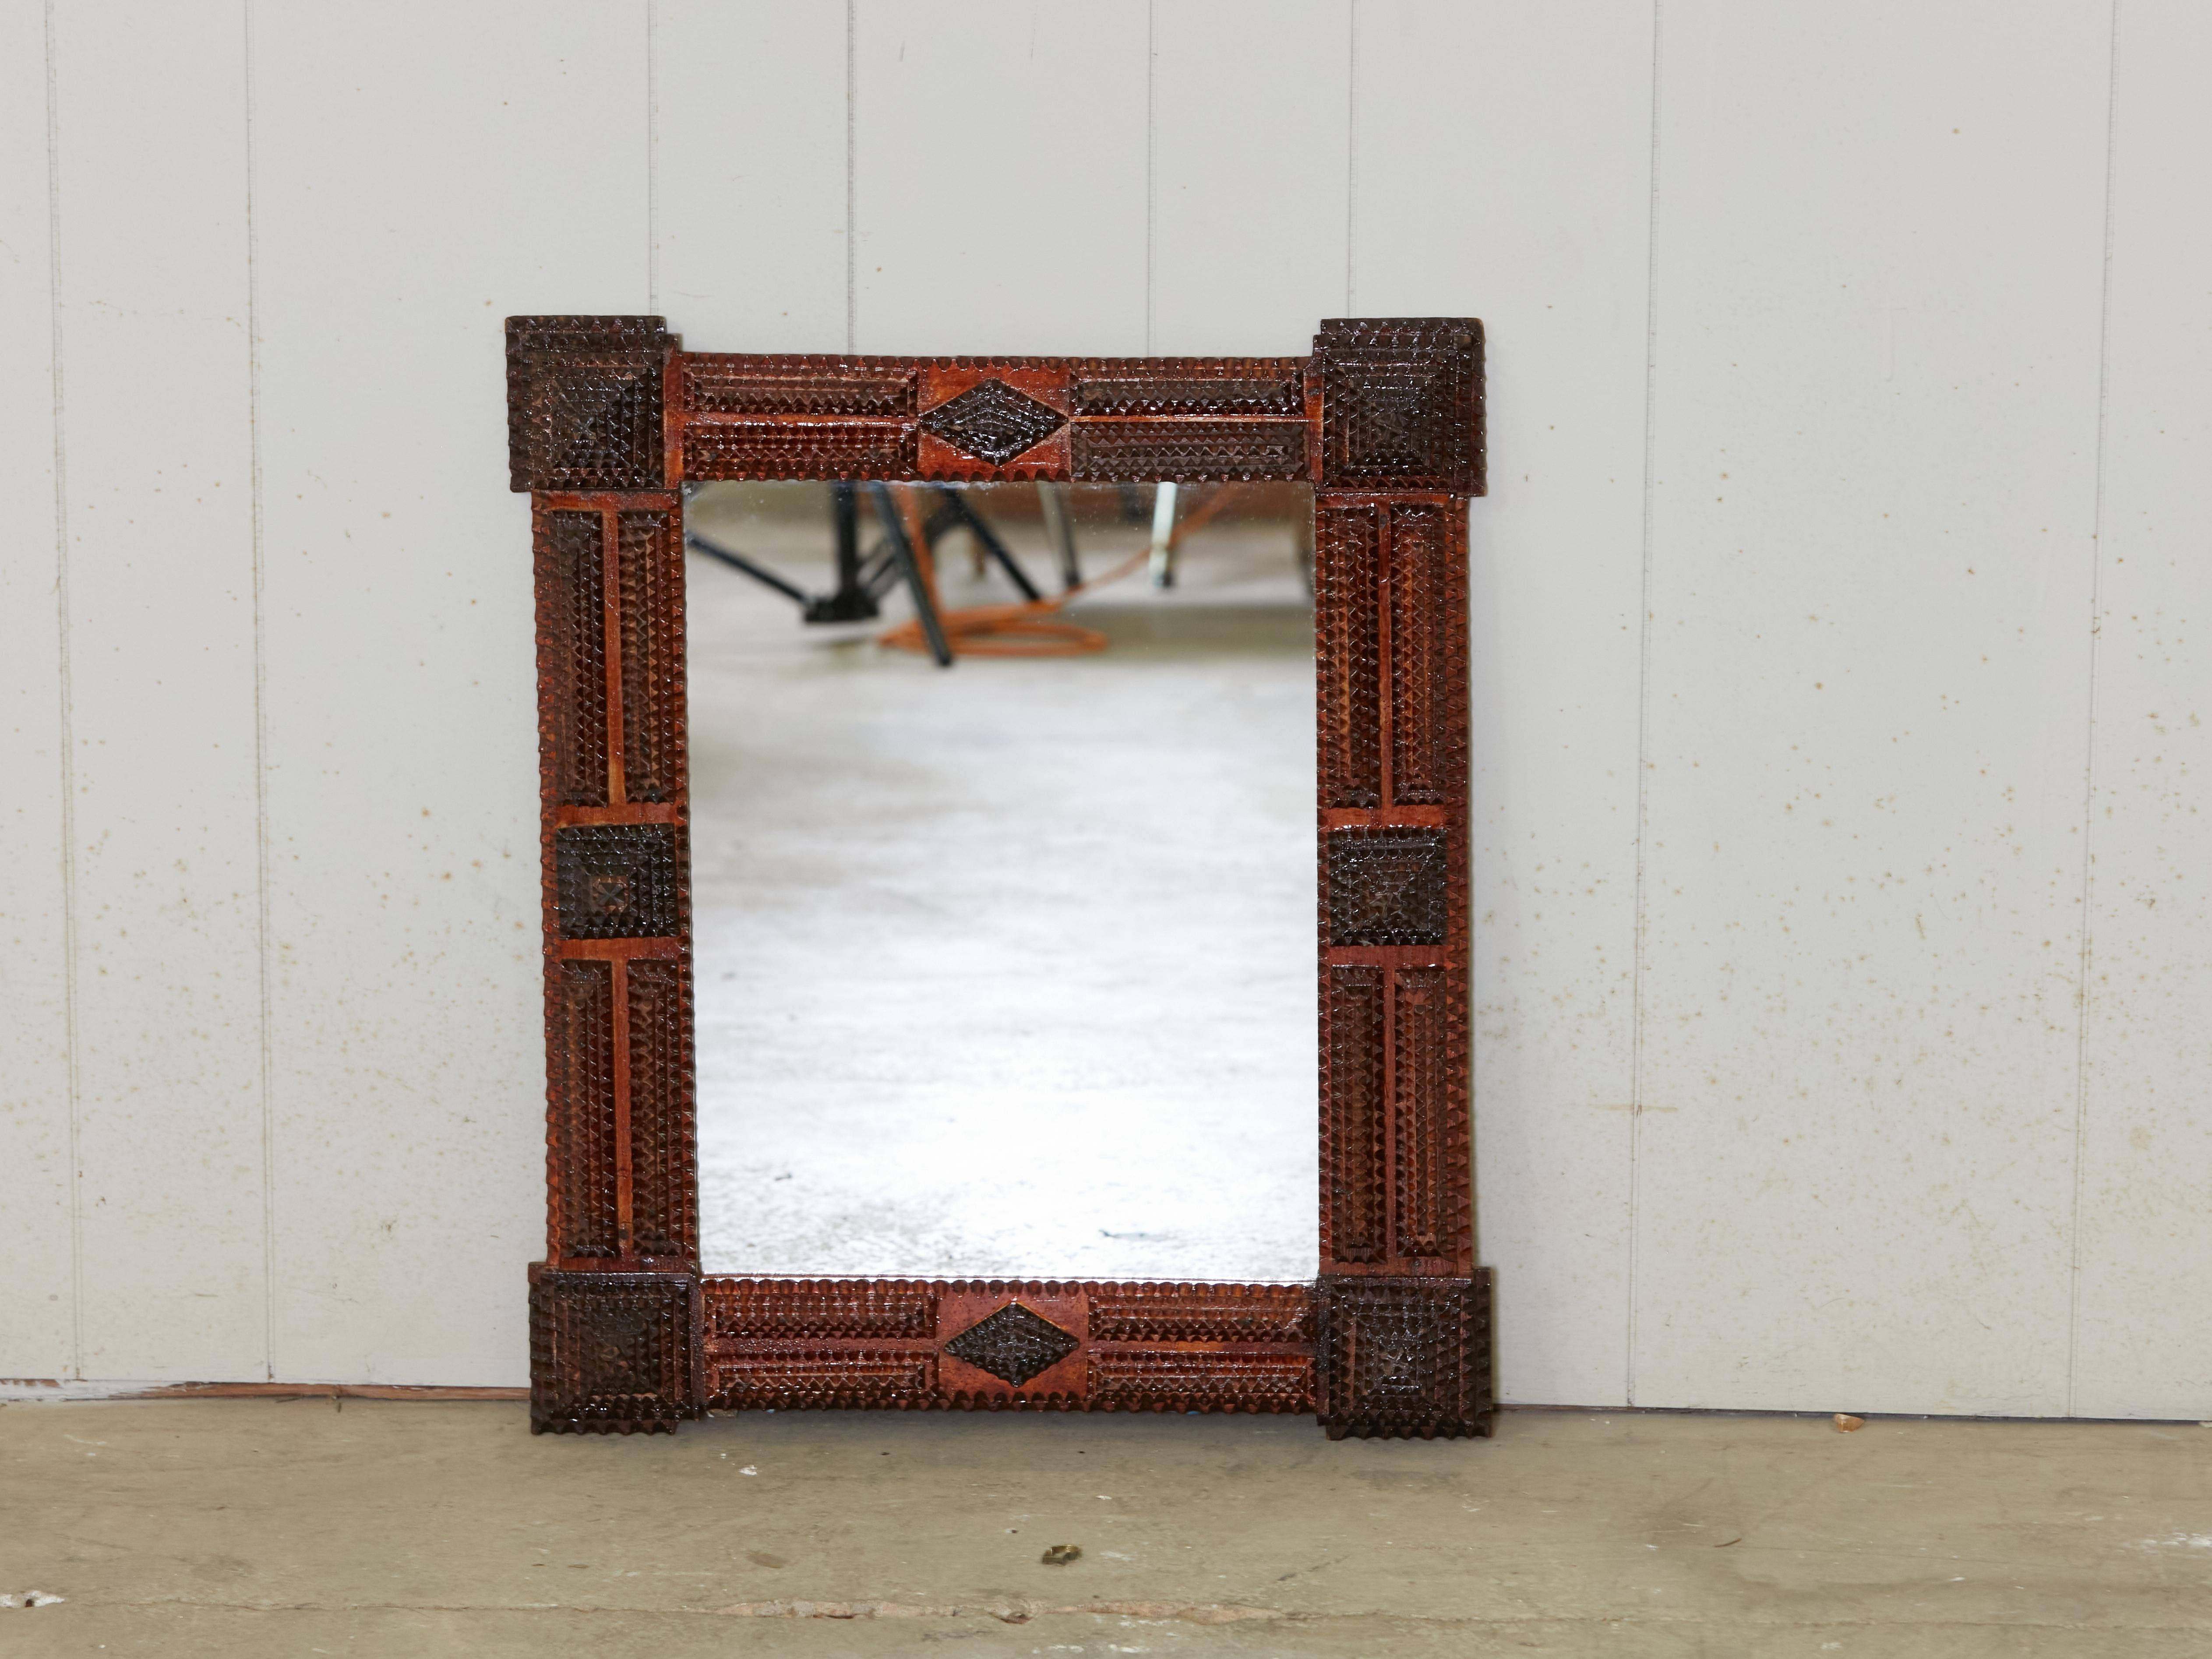 A French Turn of the century Tramp Art hand-carved mirror from the early 20th century, with protruding corners, raised pyramidal motifs and reddish brown patina. Created in France during the Turn of the Century which saw the transition between the